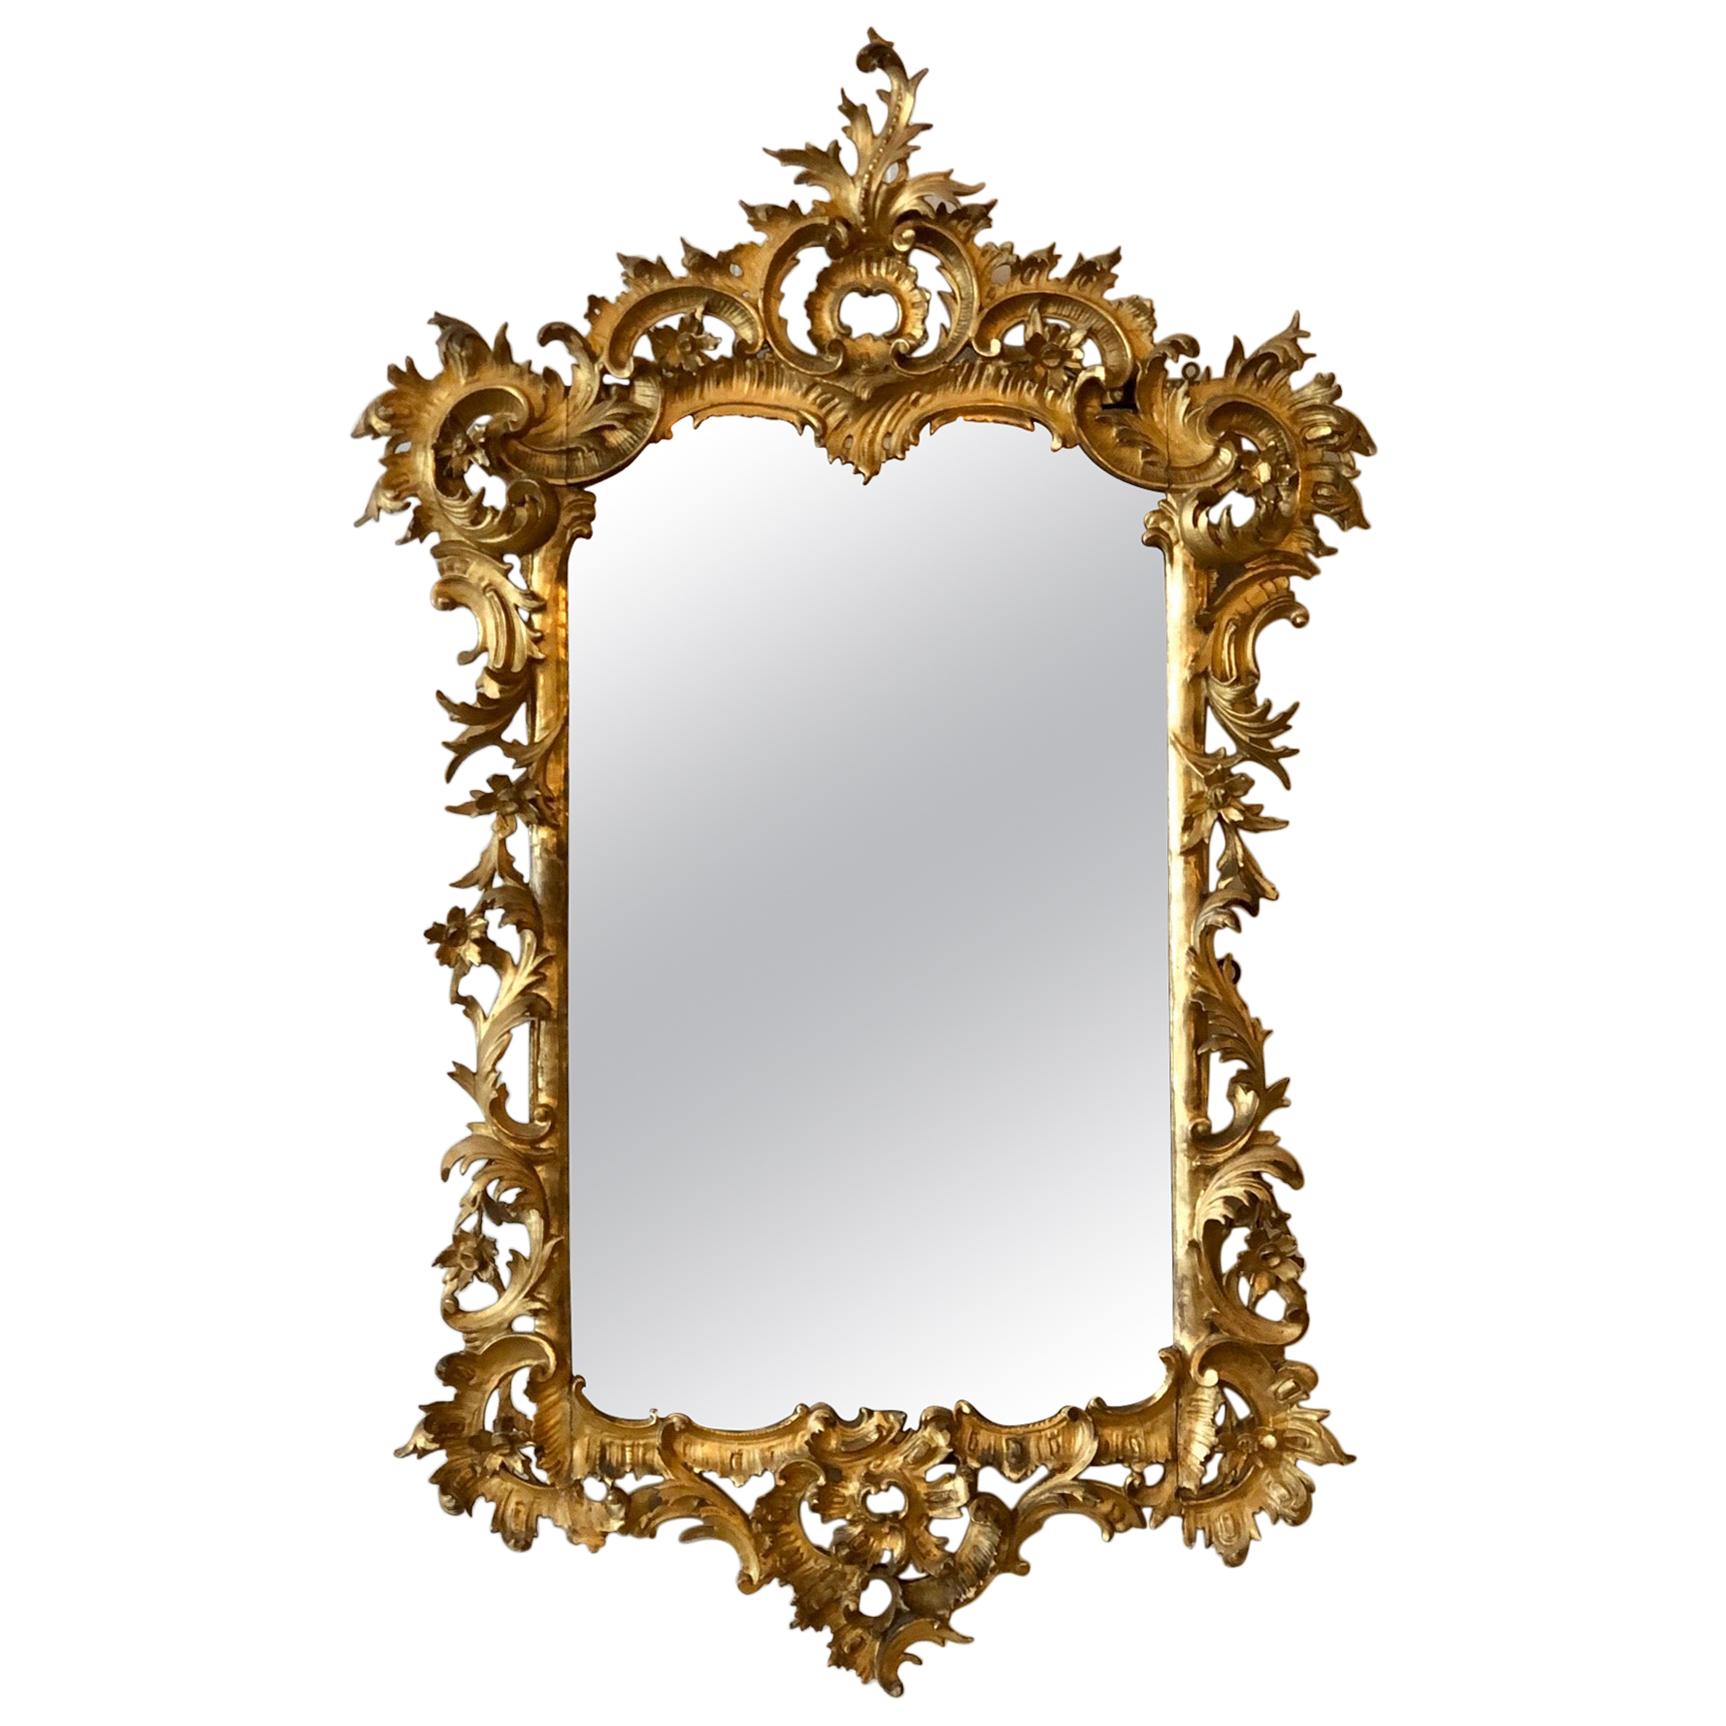 English Chippendale Carved Giltwood Mirror, 18th Century